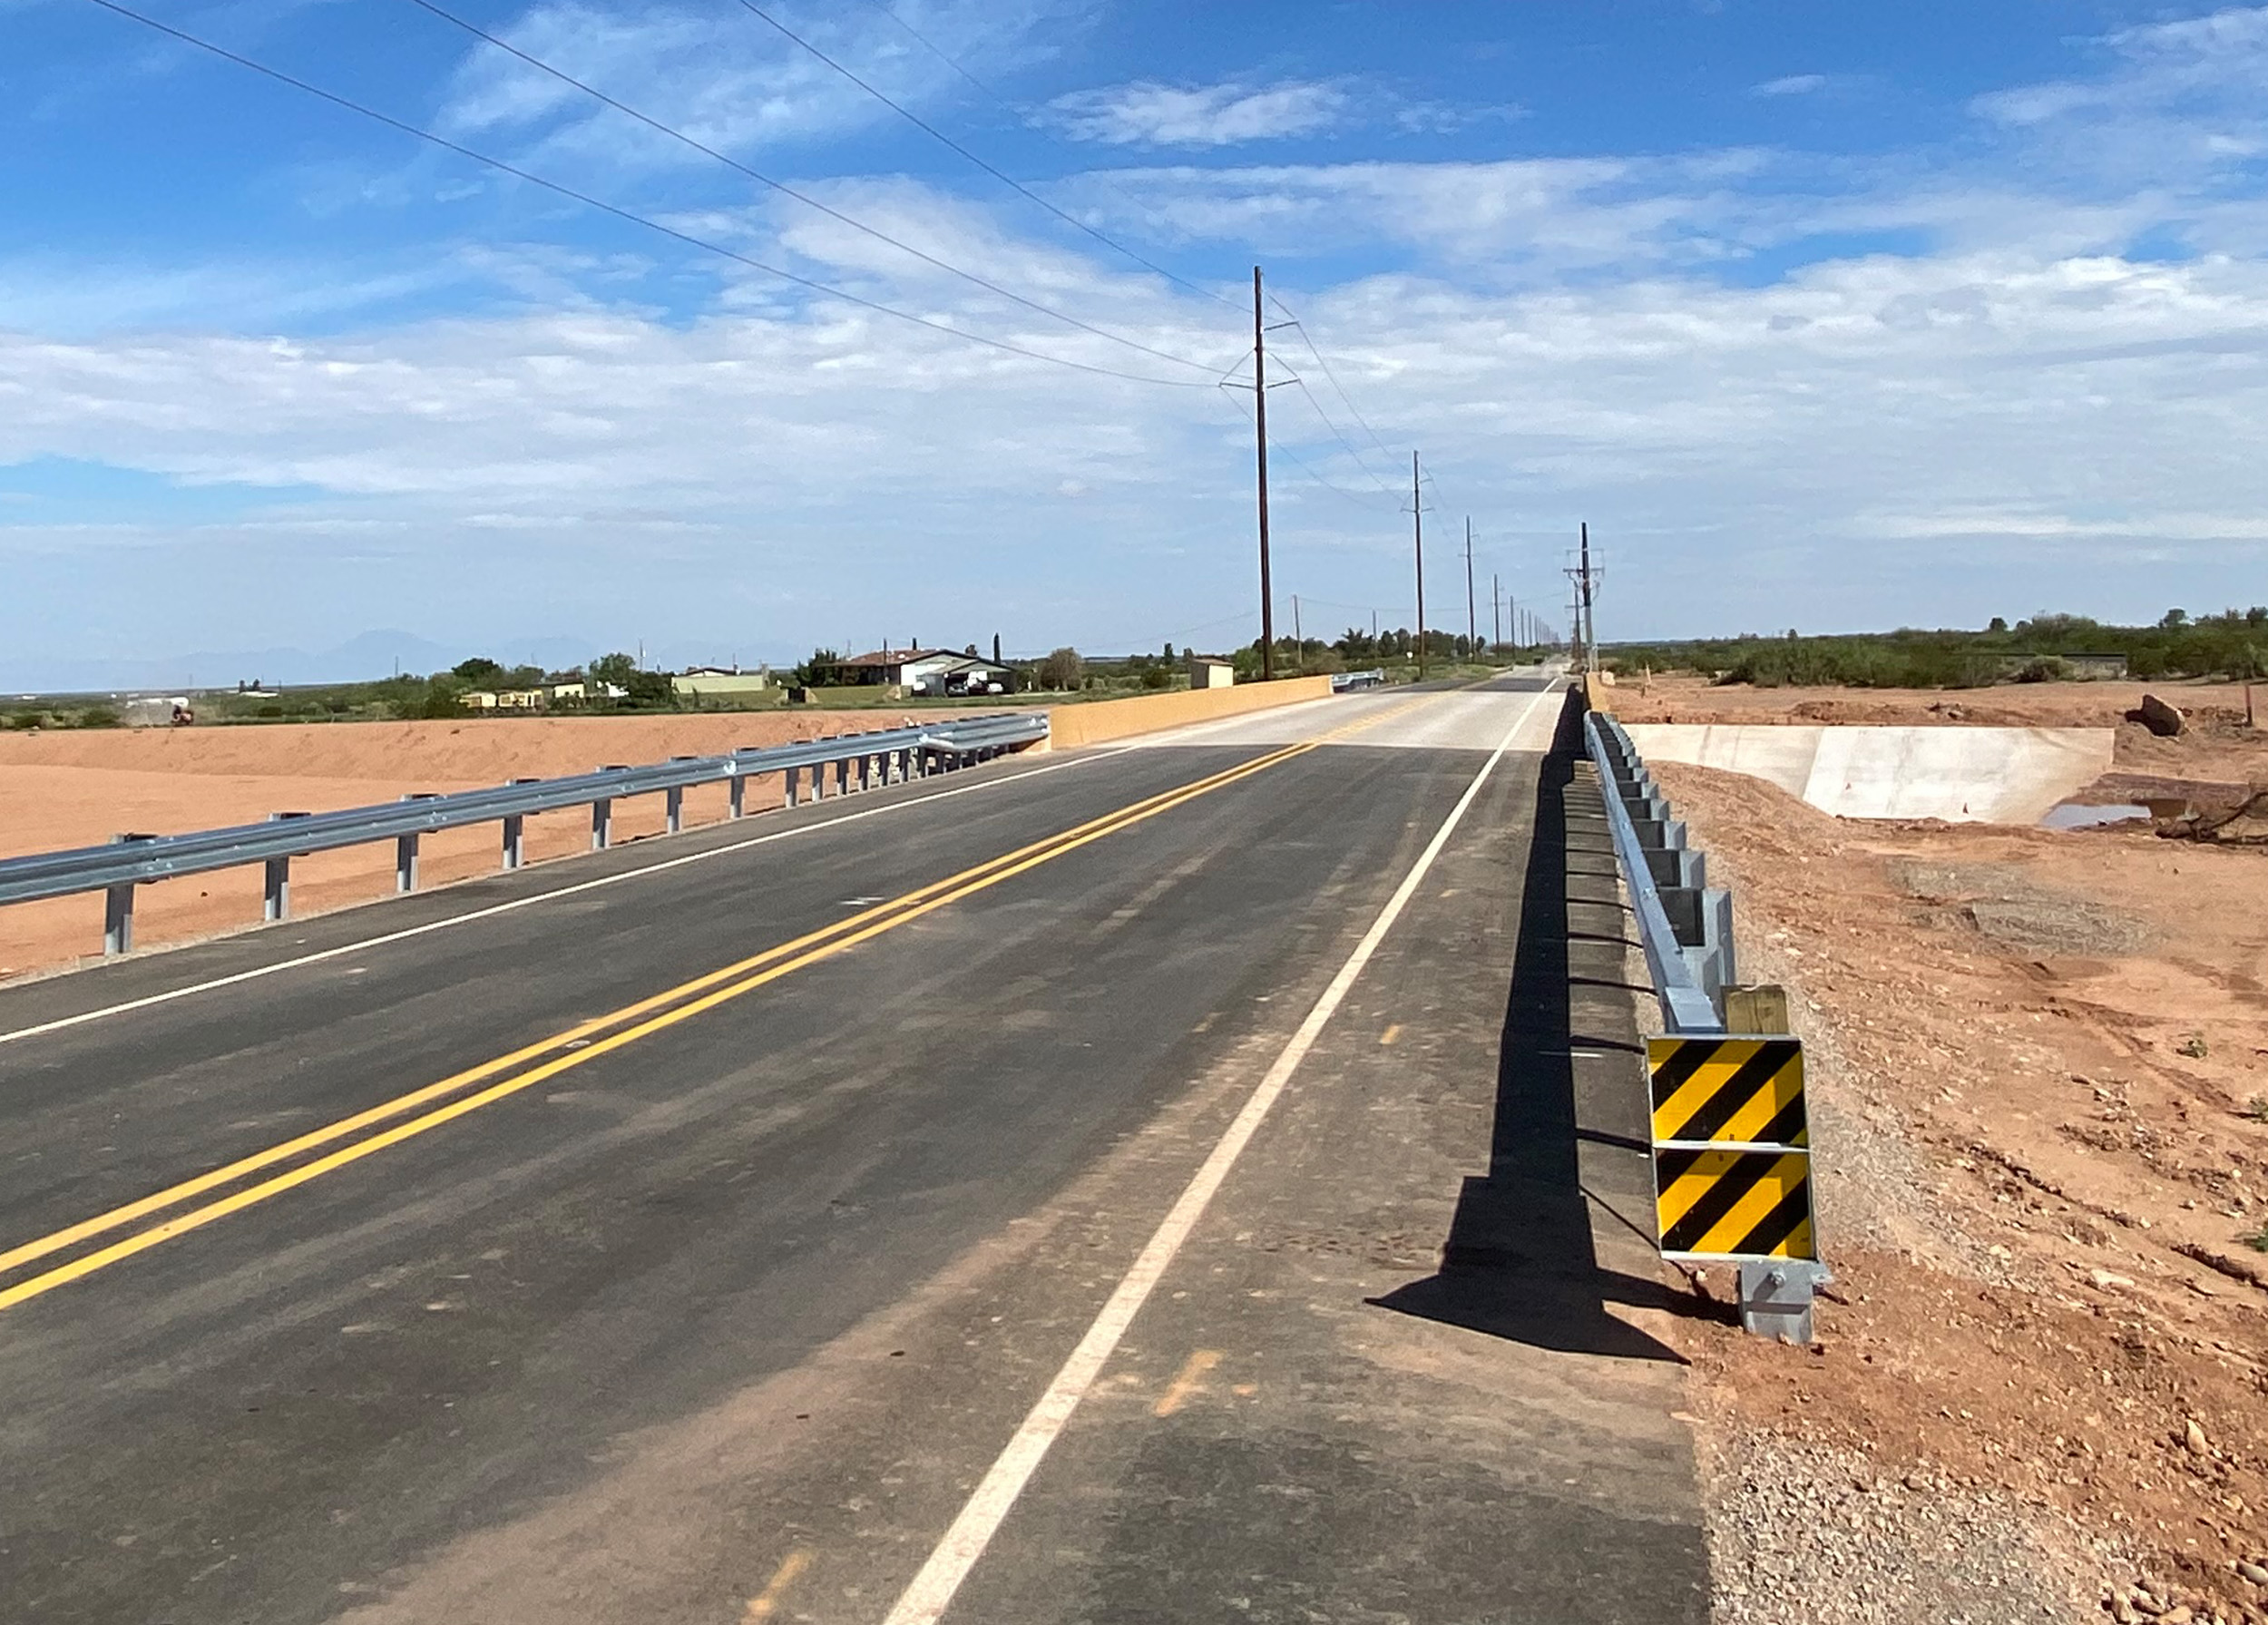 Wilson & Company worked with the County of Otero to design the optimum solution for this arroyo crossing and coordinated with Union Pacific Railroad on construction and maintenance.